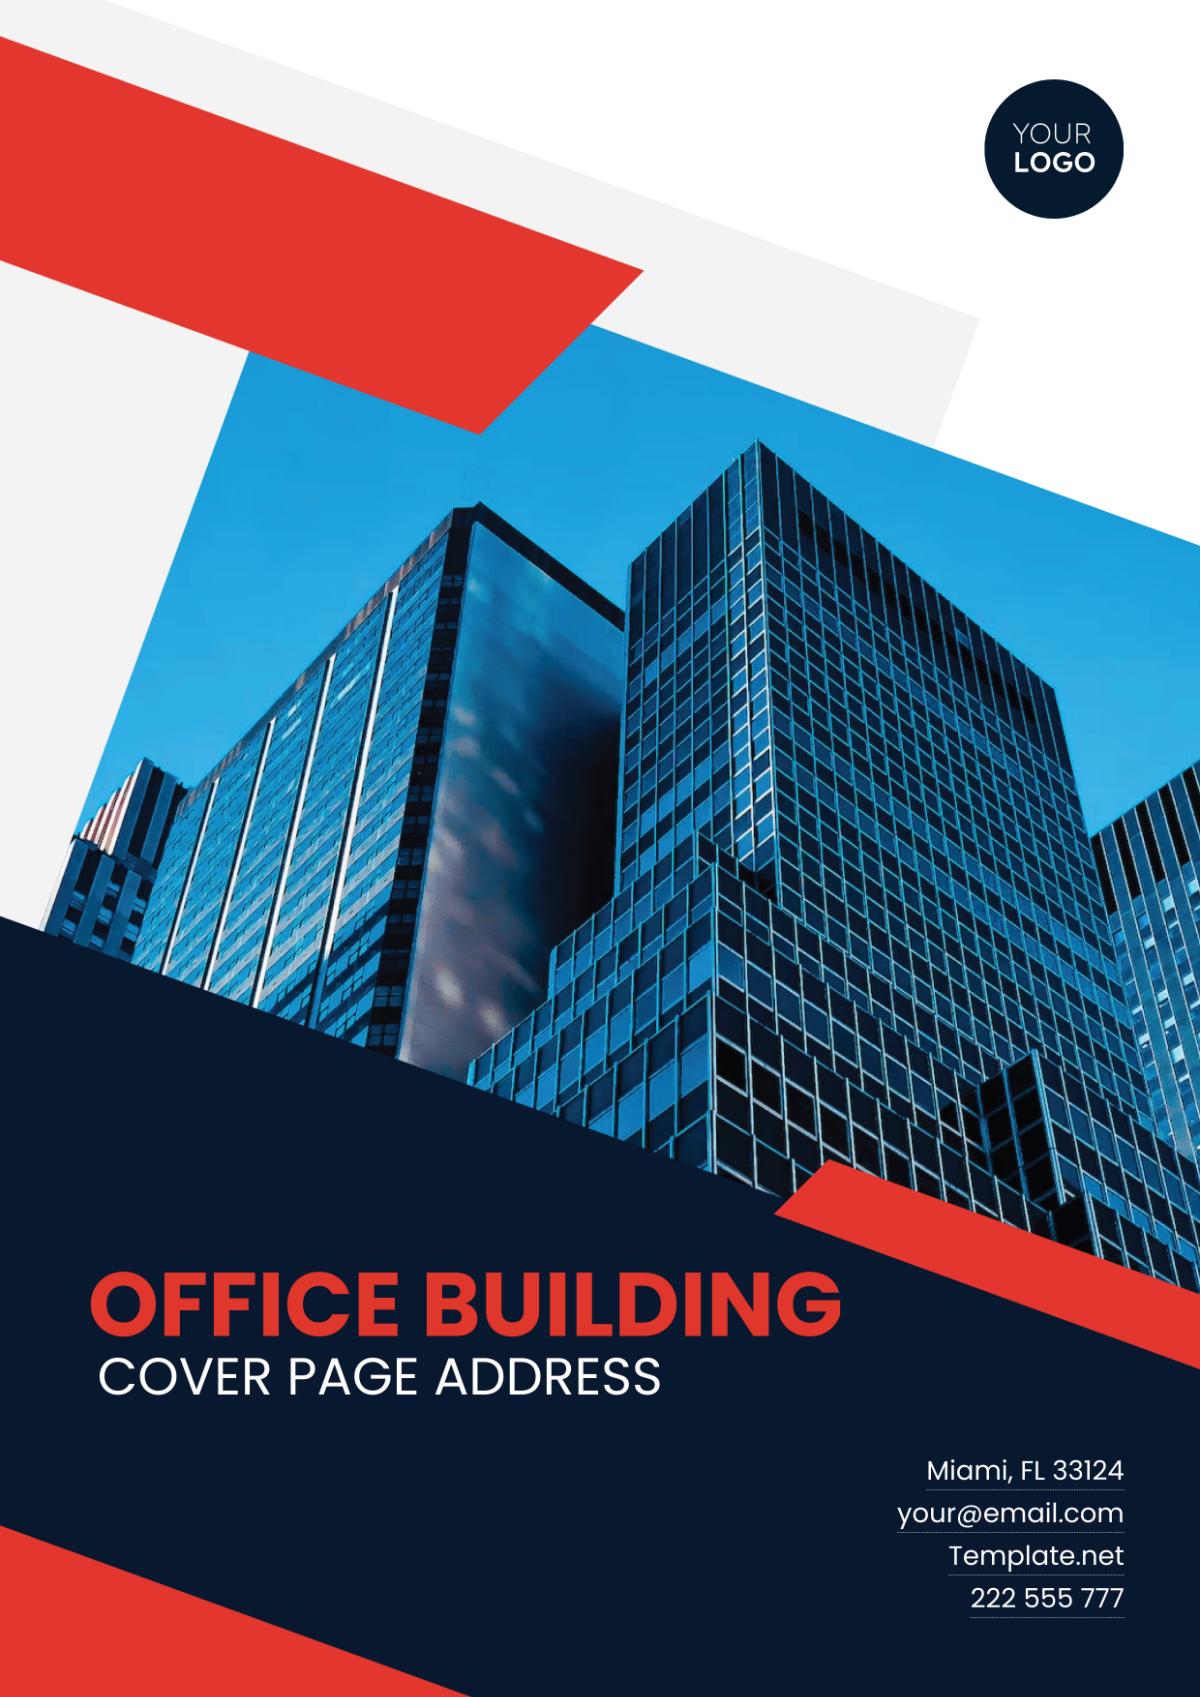 Free Office Building Cover Page Address Template